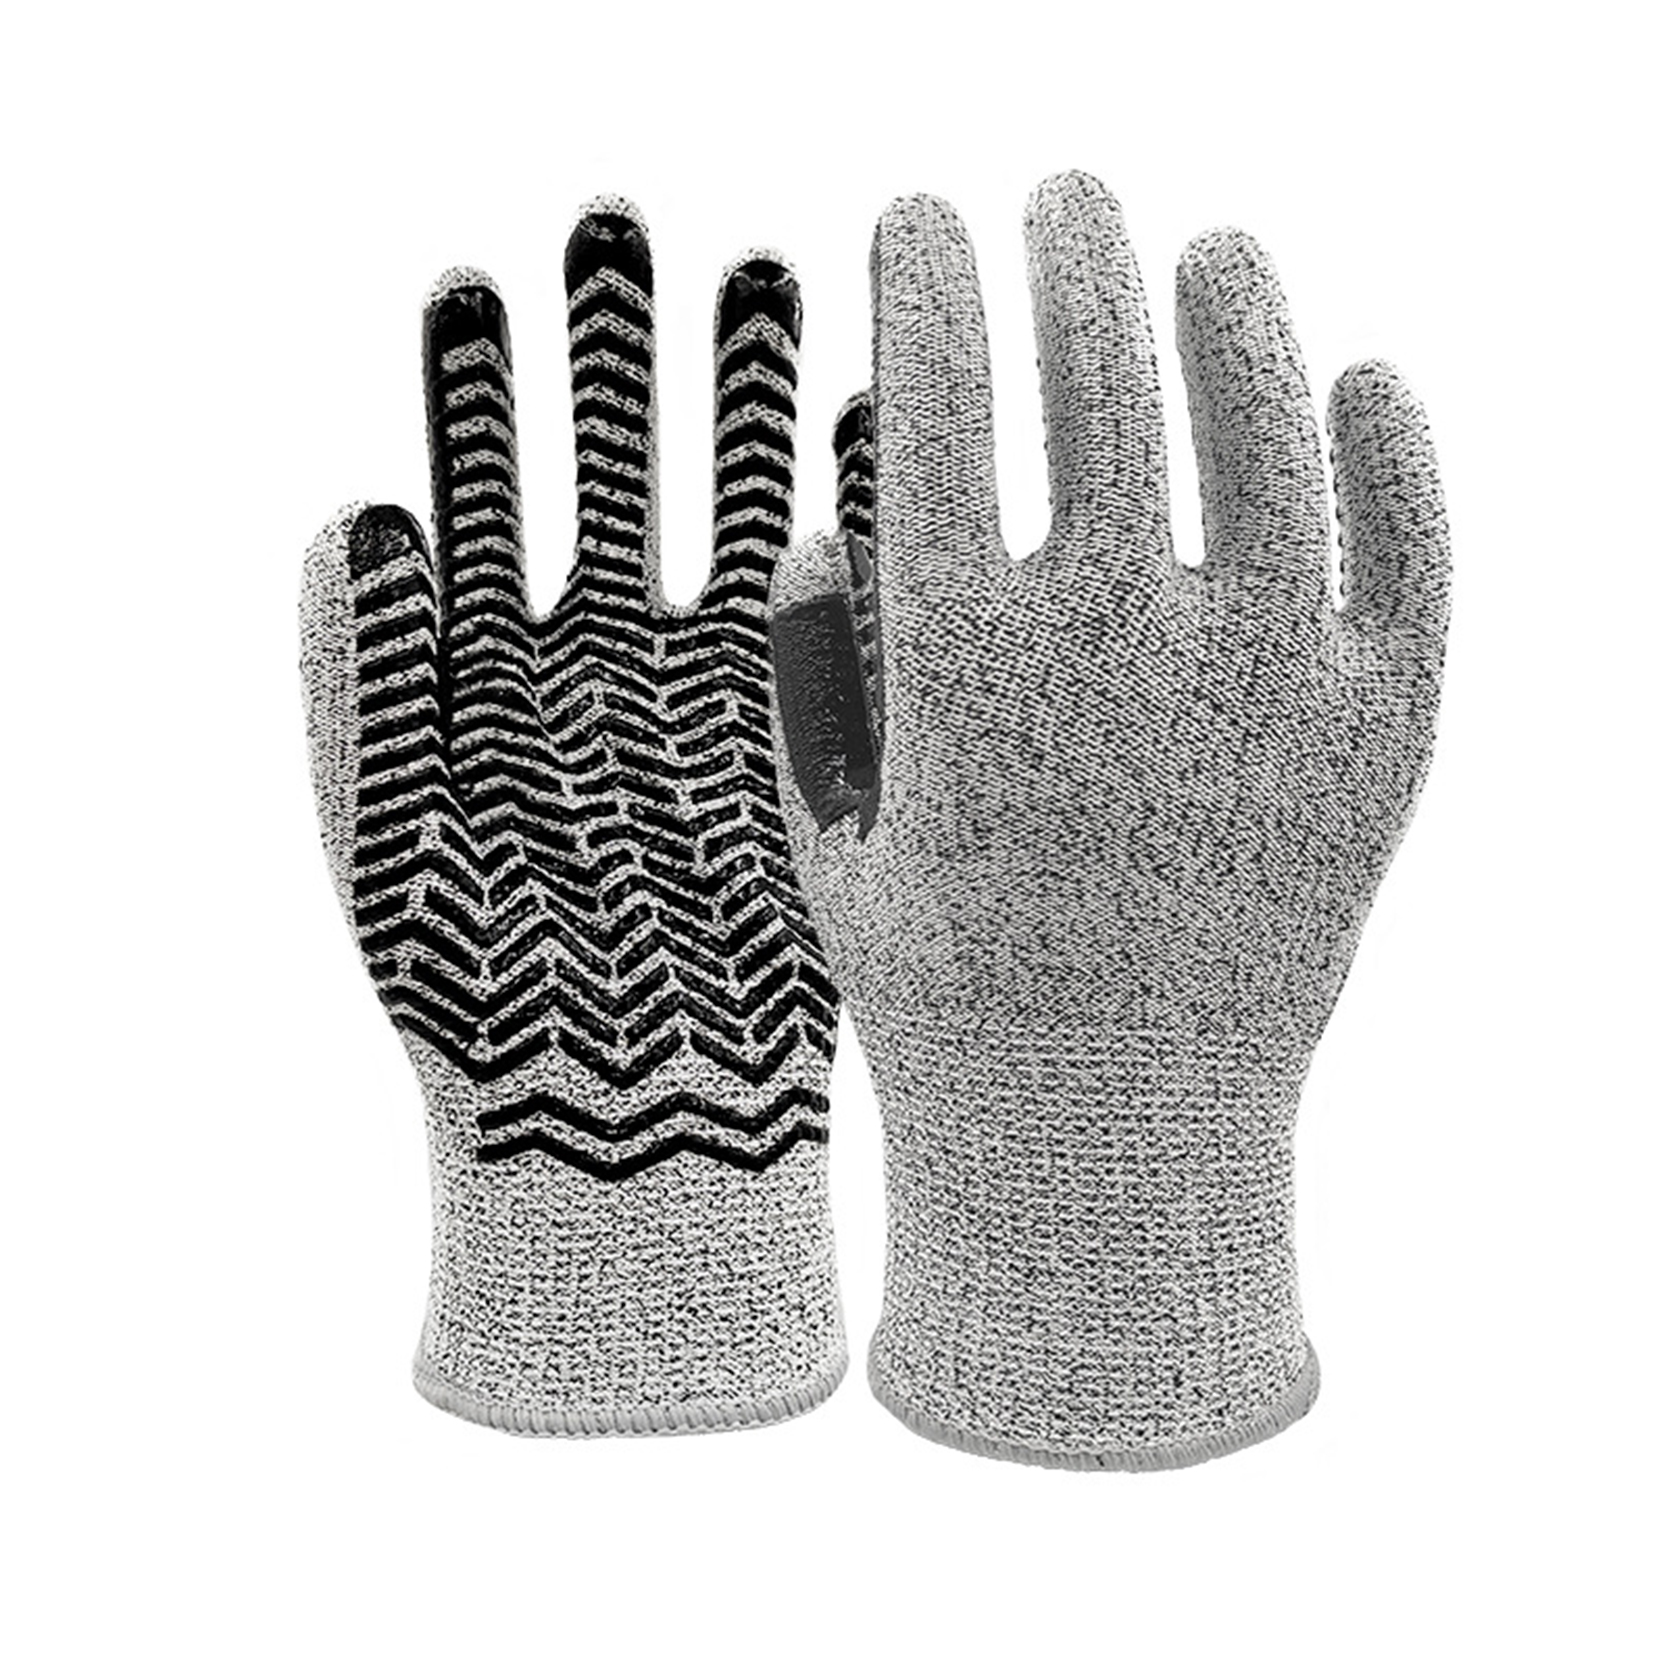 Level 4 Cut Resistant Gloves Food Grade Cut gloves para sa Kitchen Gardening Wood Carving na may Rubber Grip Stripe